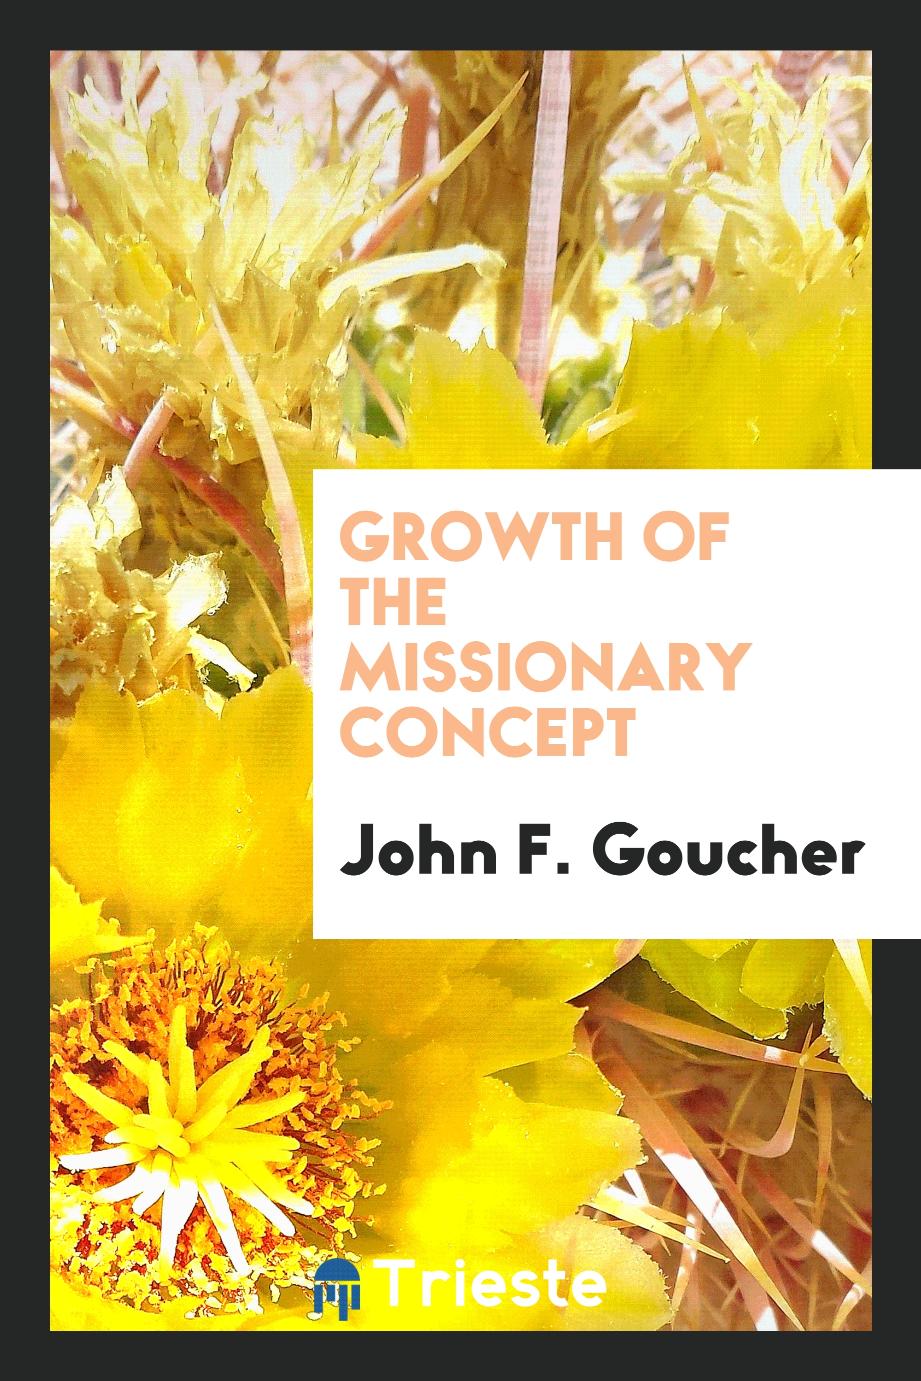 Growth of the missionary concept